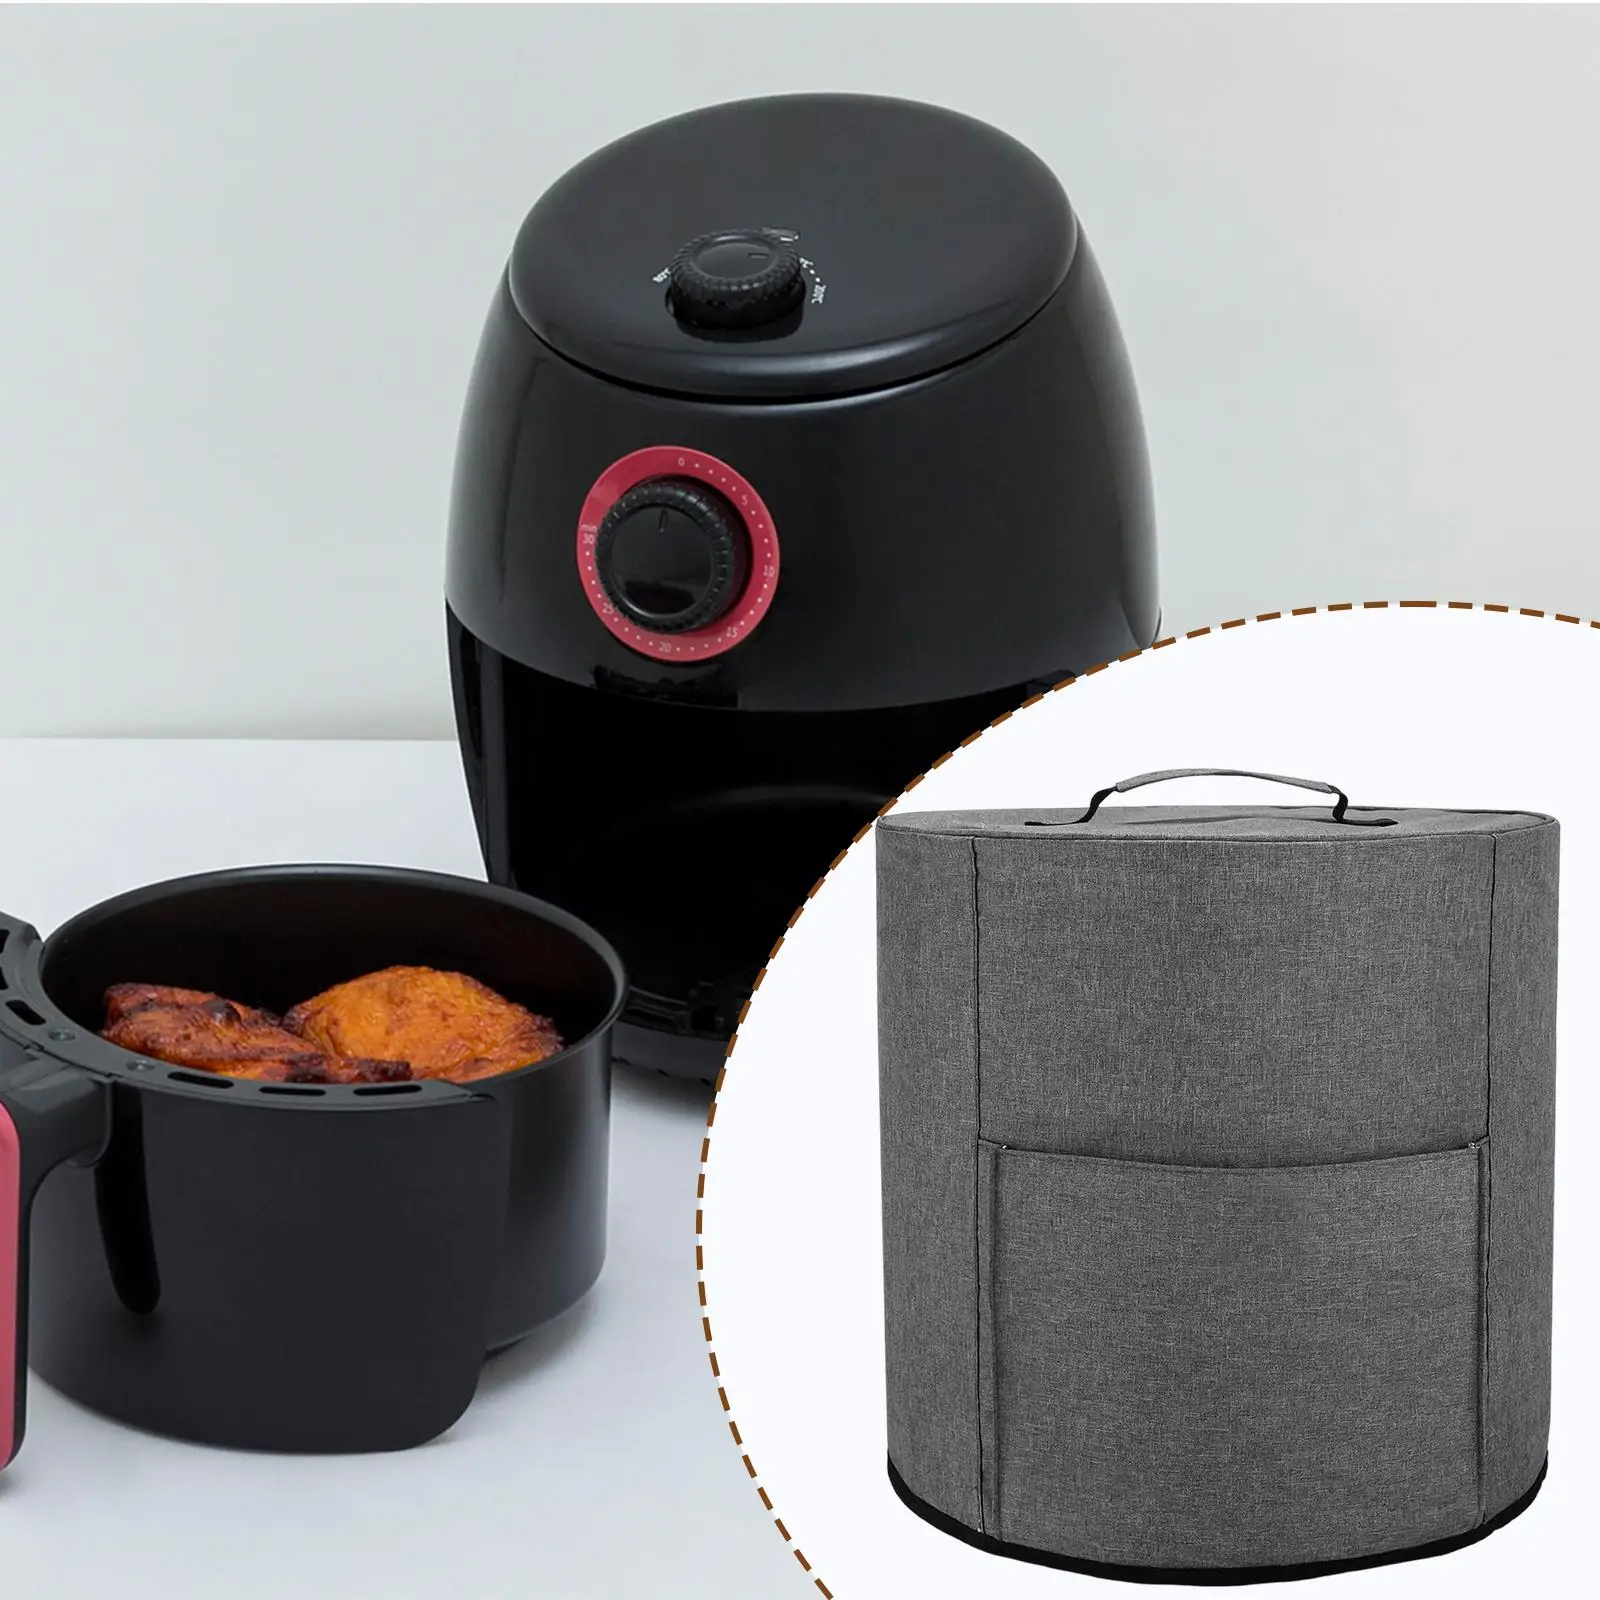 Air Fryer Cover Protective Cover Washable Restaurant Lightweight Appliance Cover Dust Cover Rice Cooker Cover for Cookware Pot